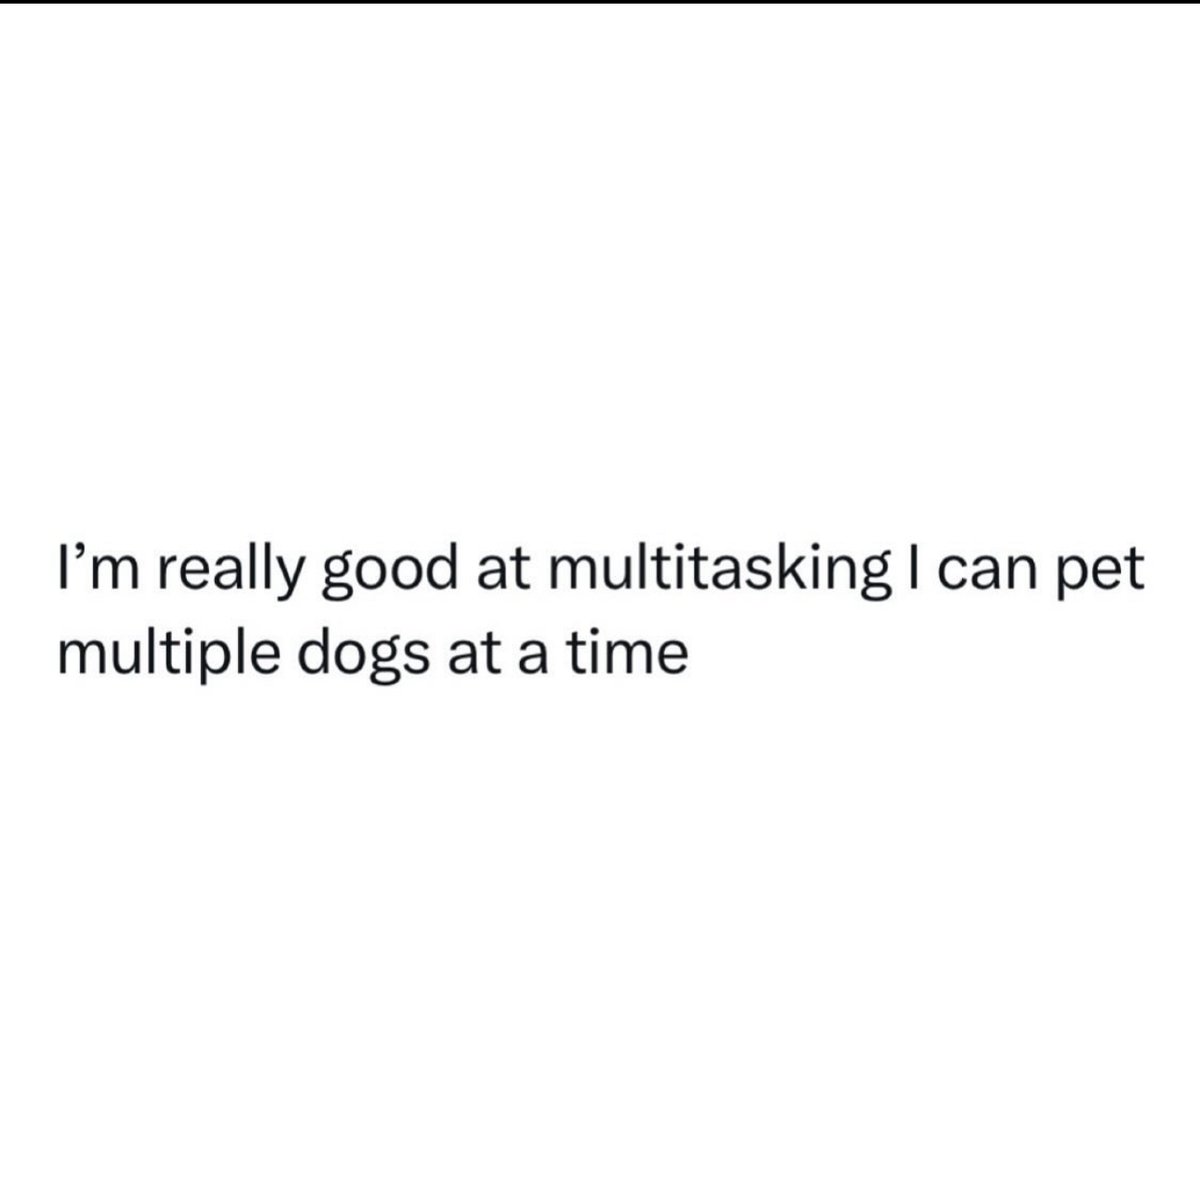 Master of multitasking: Taking the term 'dog whisperer' to another level, one paw at a time 🐾 #doglife #multitasking  #furryfriends  #dogmemes  #petparents  #pethumor